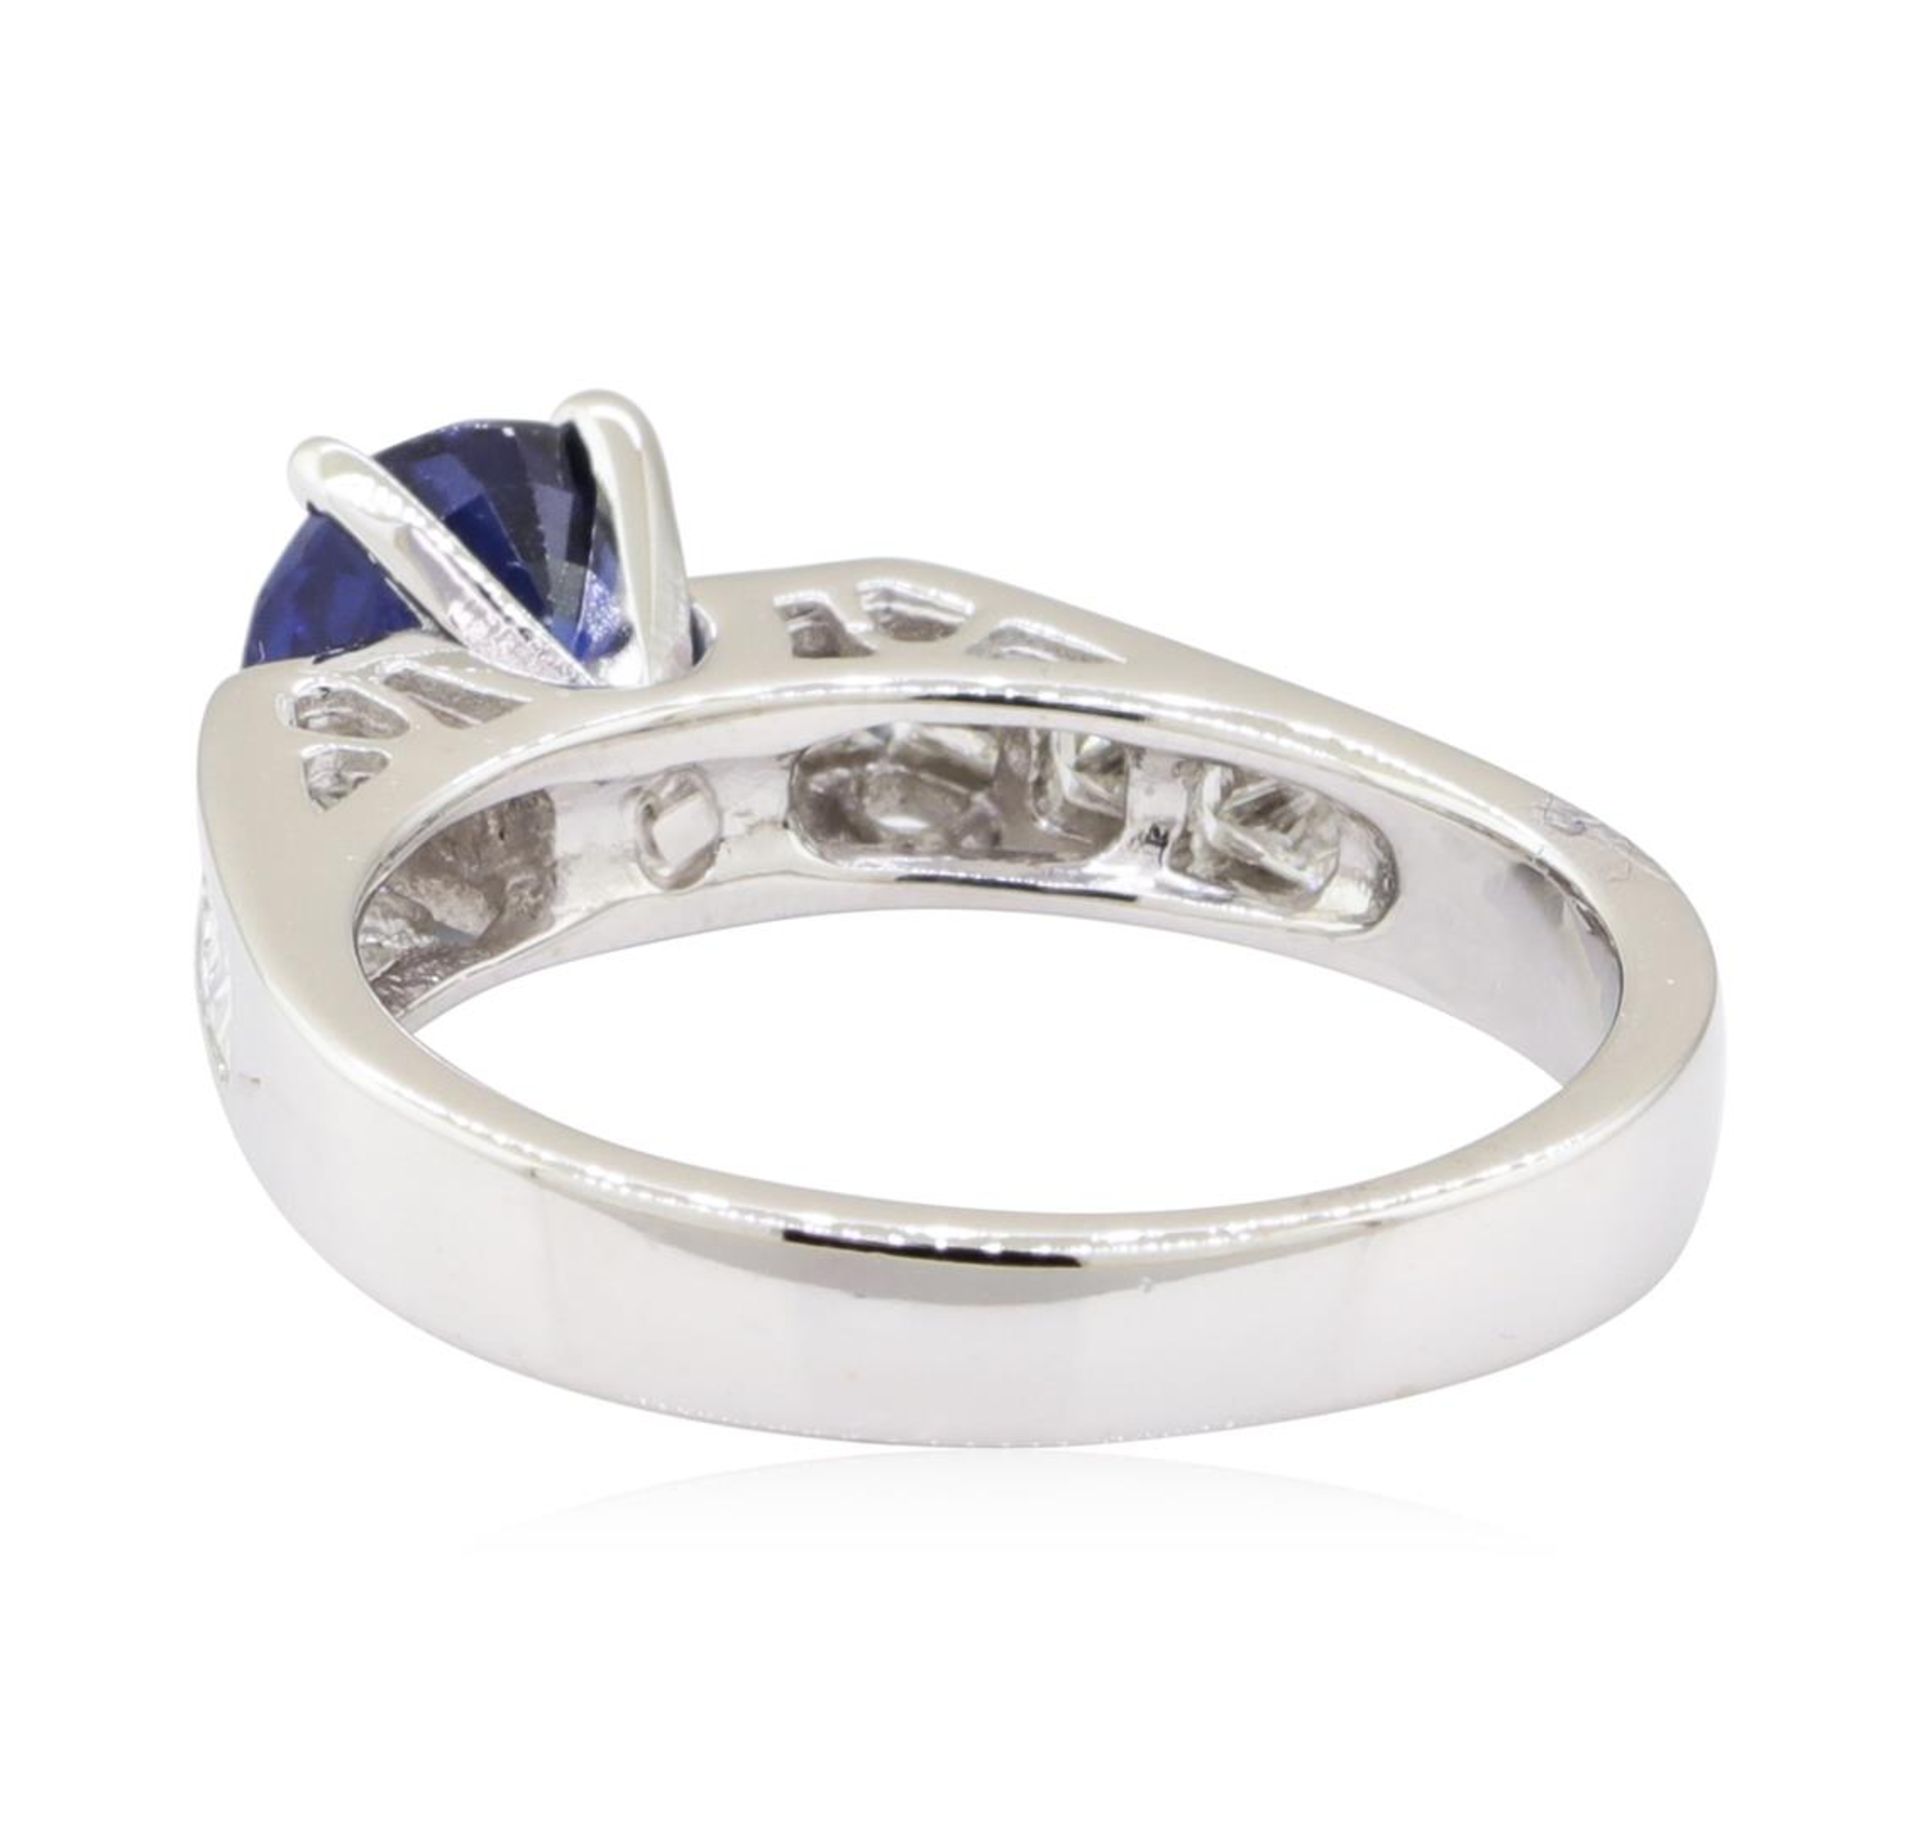 2.42 ctw Sapphire and Diamond Ring - 14KT White Gold - Image 3 of 5